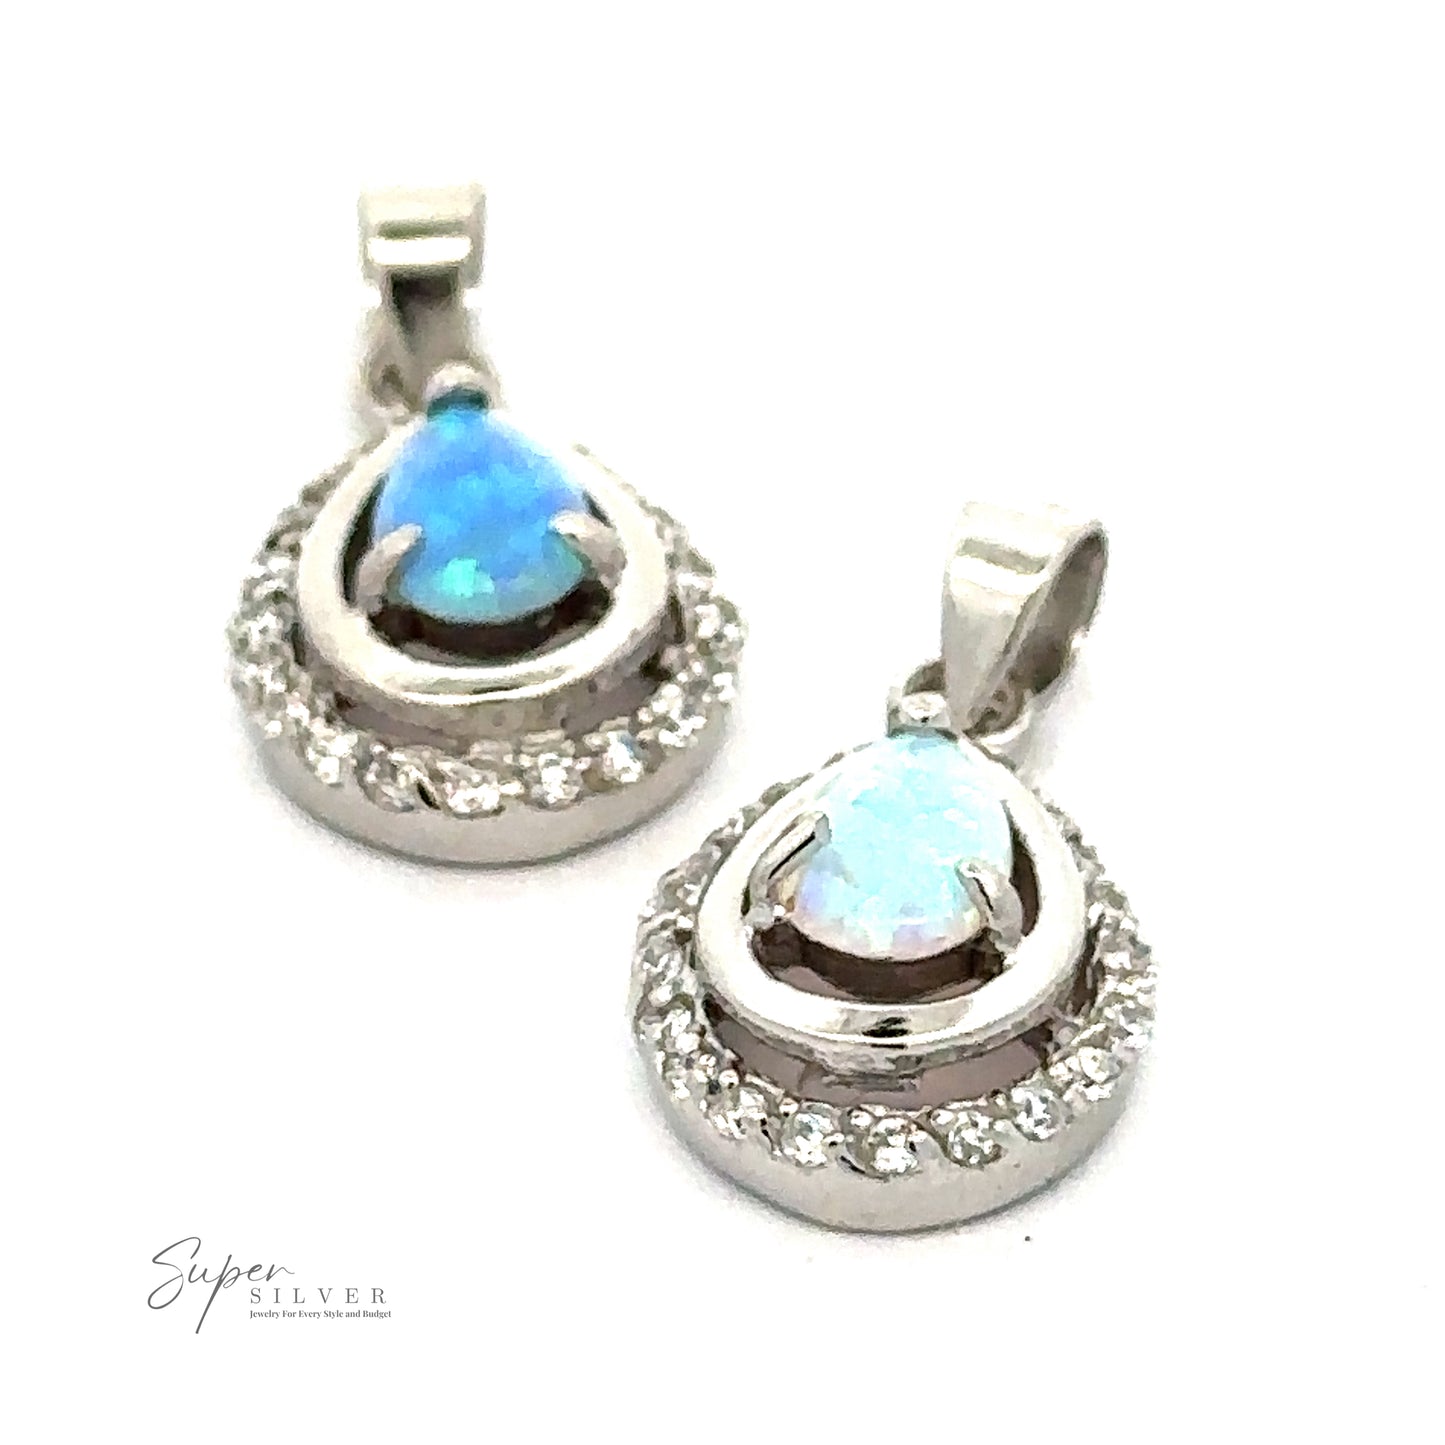 
                  
                    Two teardrop-shaped Opal Pendants with Cubic Zirconia feature blue opal stones set in silver, surrounded by small, clear crystals and cubic zirconia stones. The Super Silver logo is visible at the bottom left.
                  
                